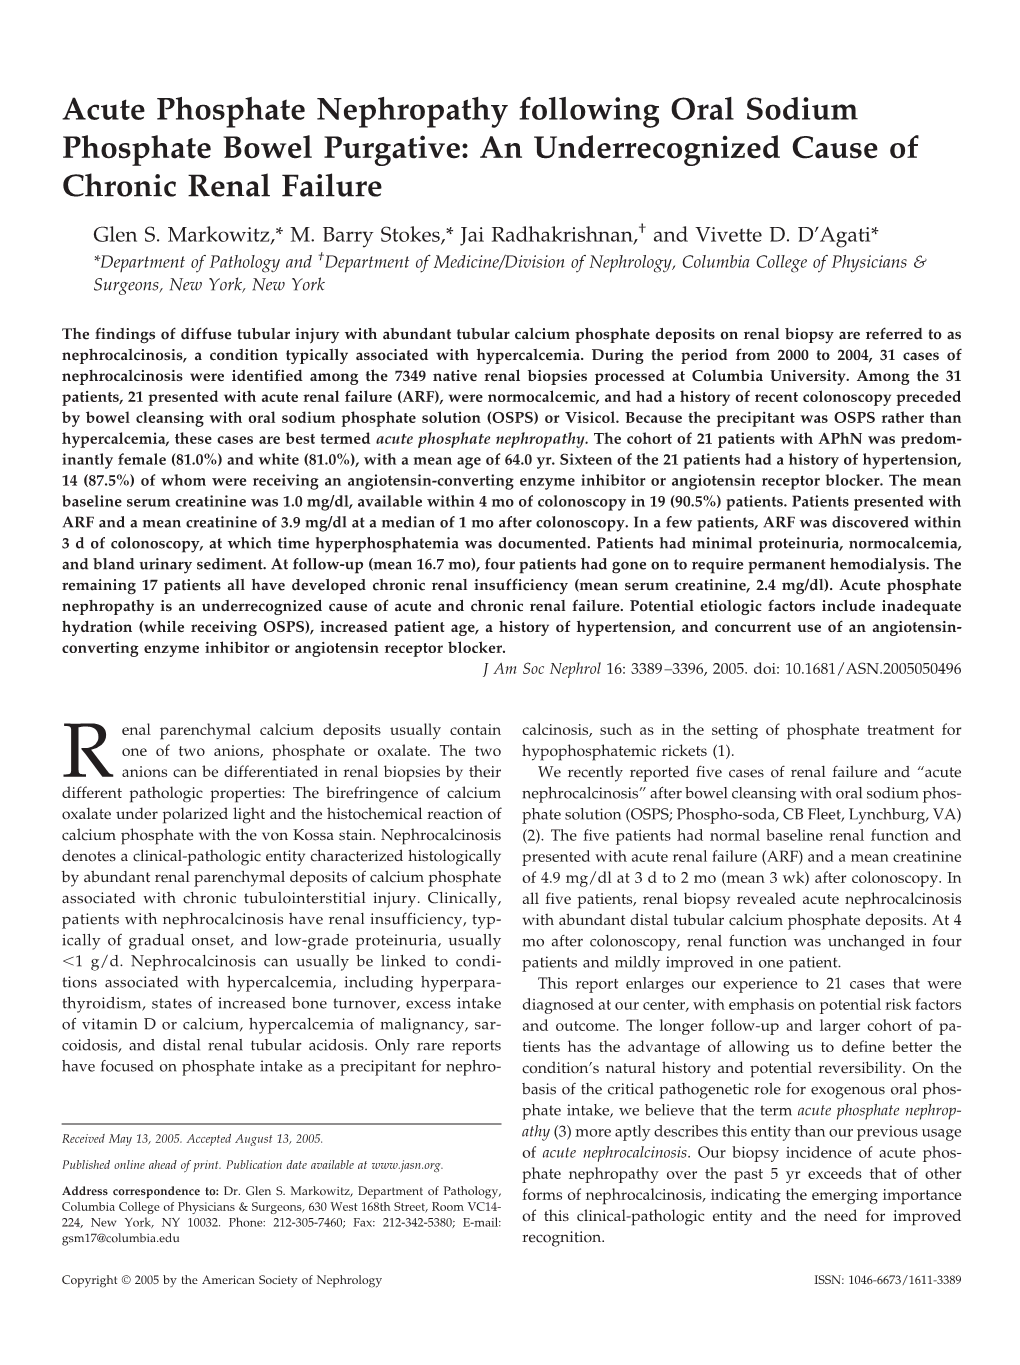 An Underrecognized Cause of Chronic Renal Failure